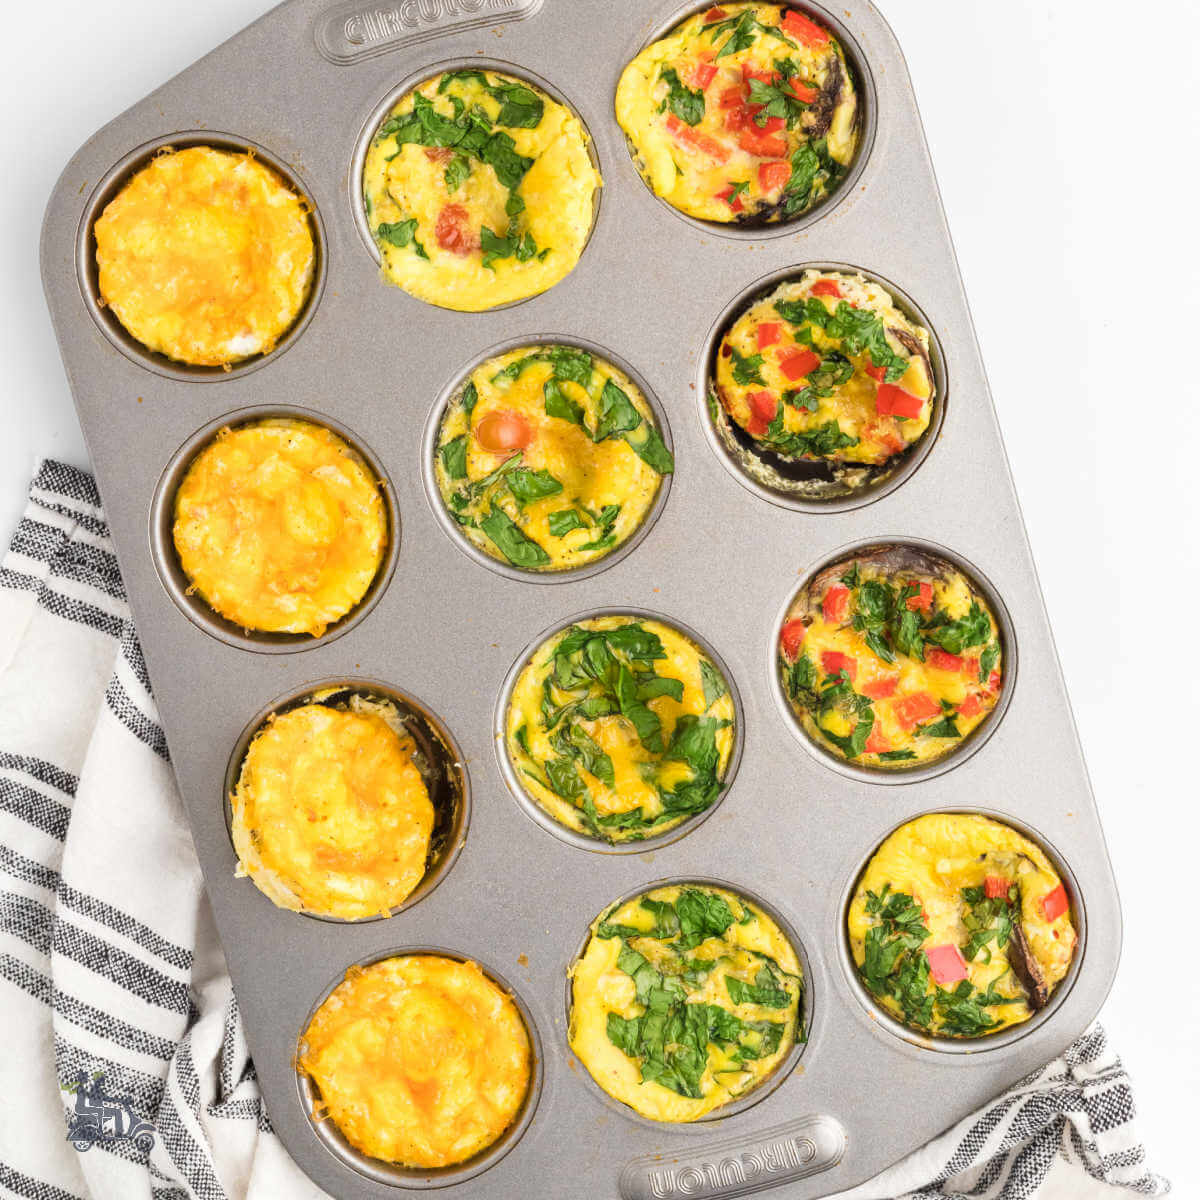 Muffin pan filled with 3 different types of egg muffins including ones with spinach, bacon, red bell pepper and cheese.